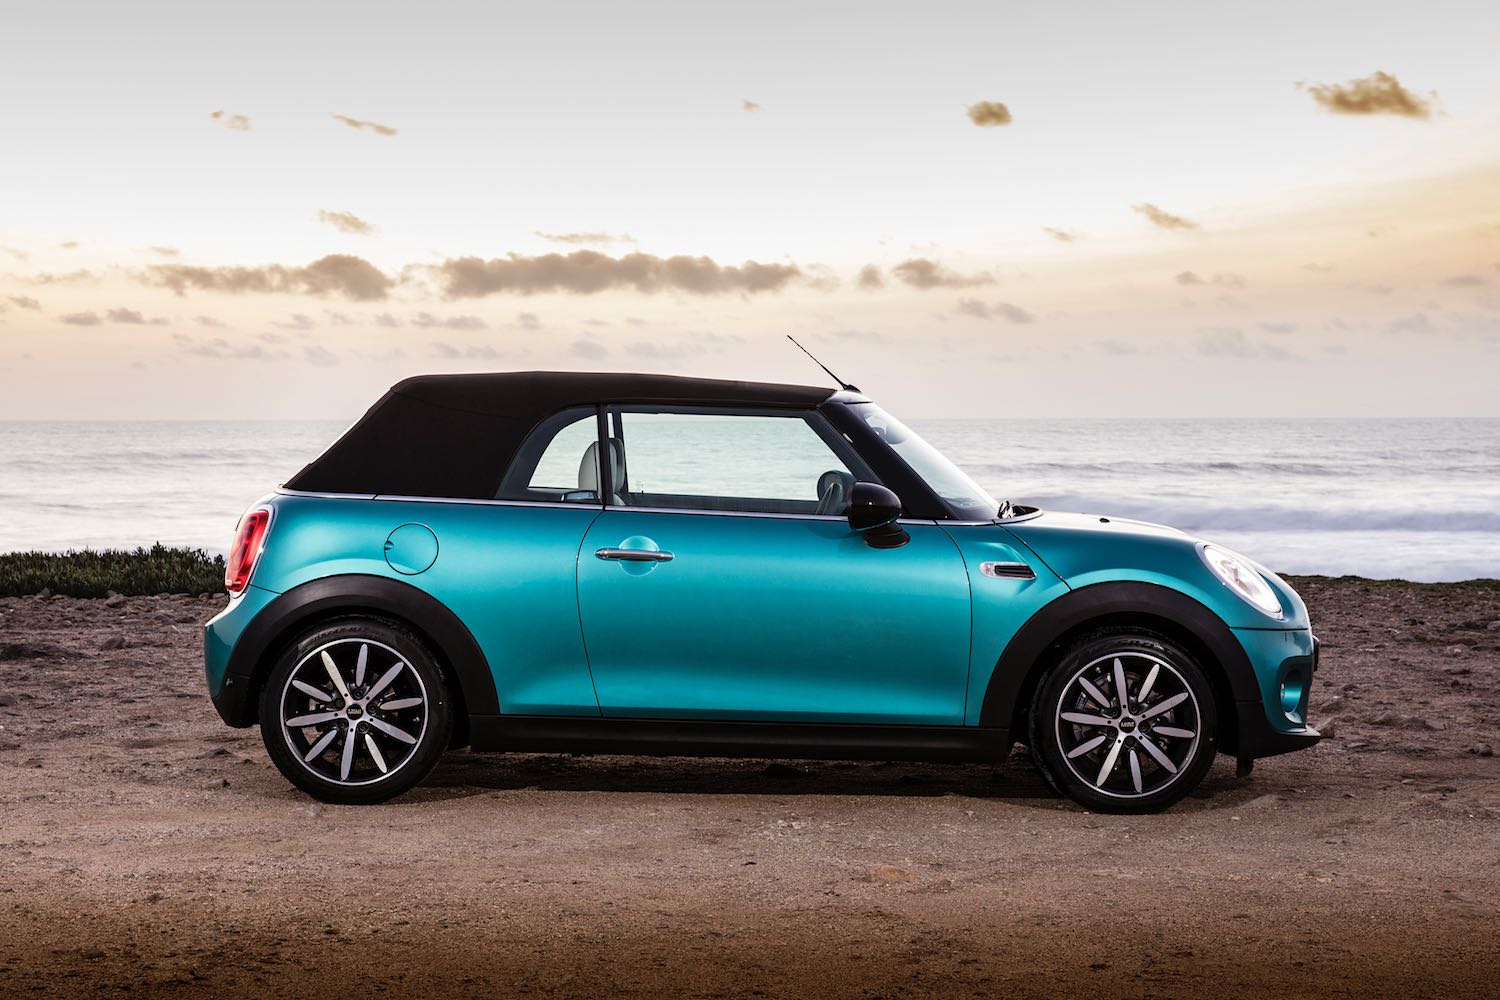 Neil Lyndon reviews the Best selling open top MINI Cooper Convertible for Drive 4